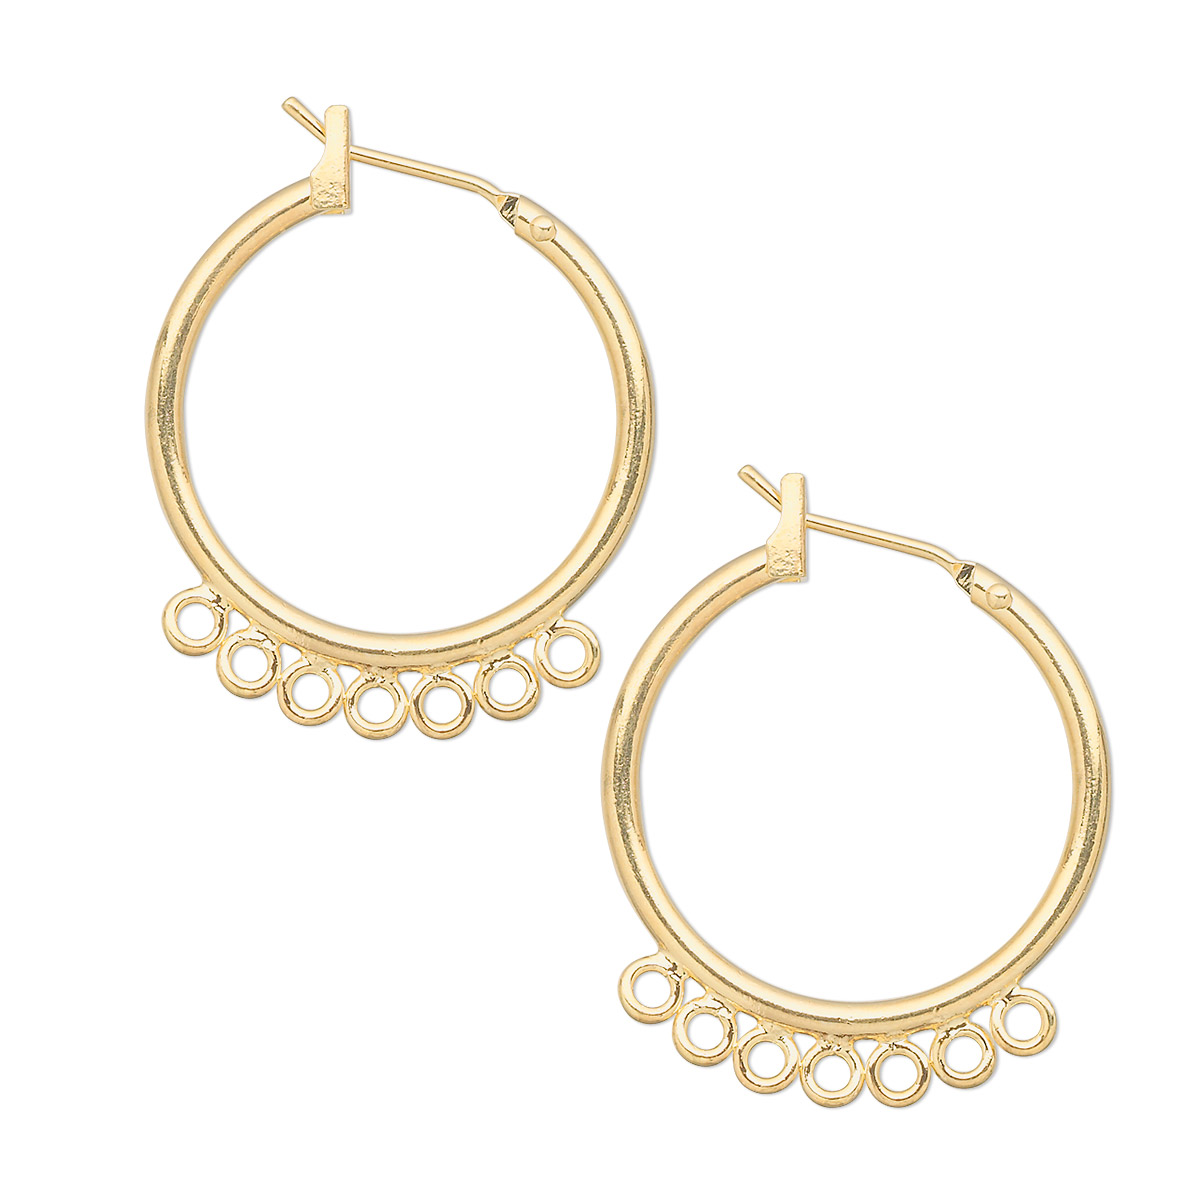 Earring, gold-plated brass, 23mm round hoop with 7 closed loops and ...